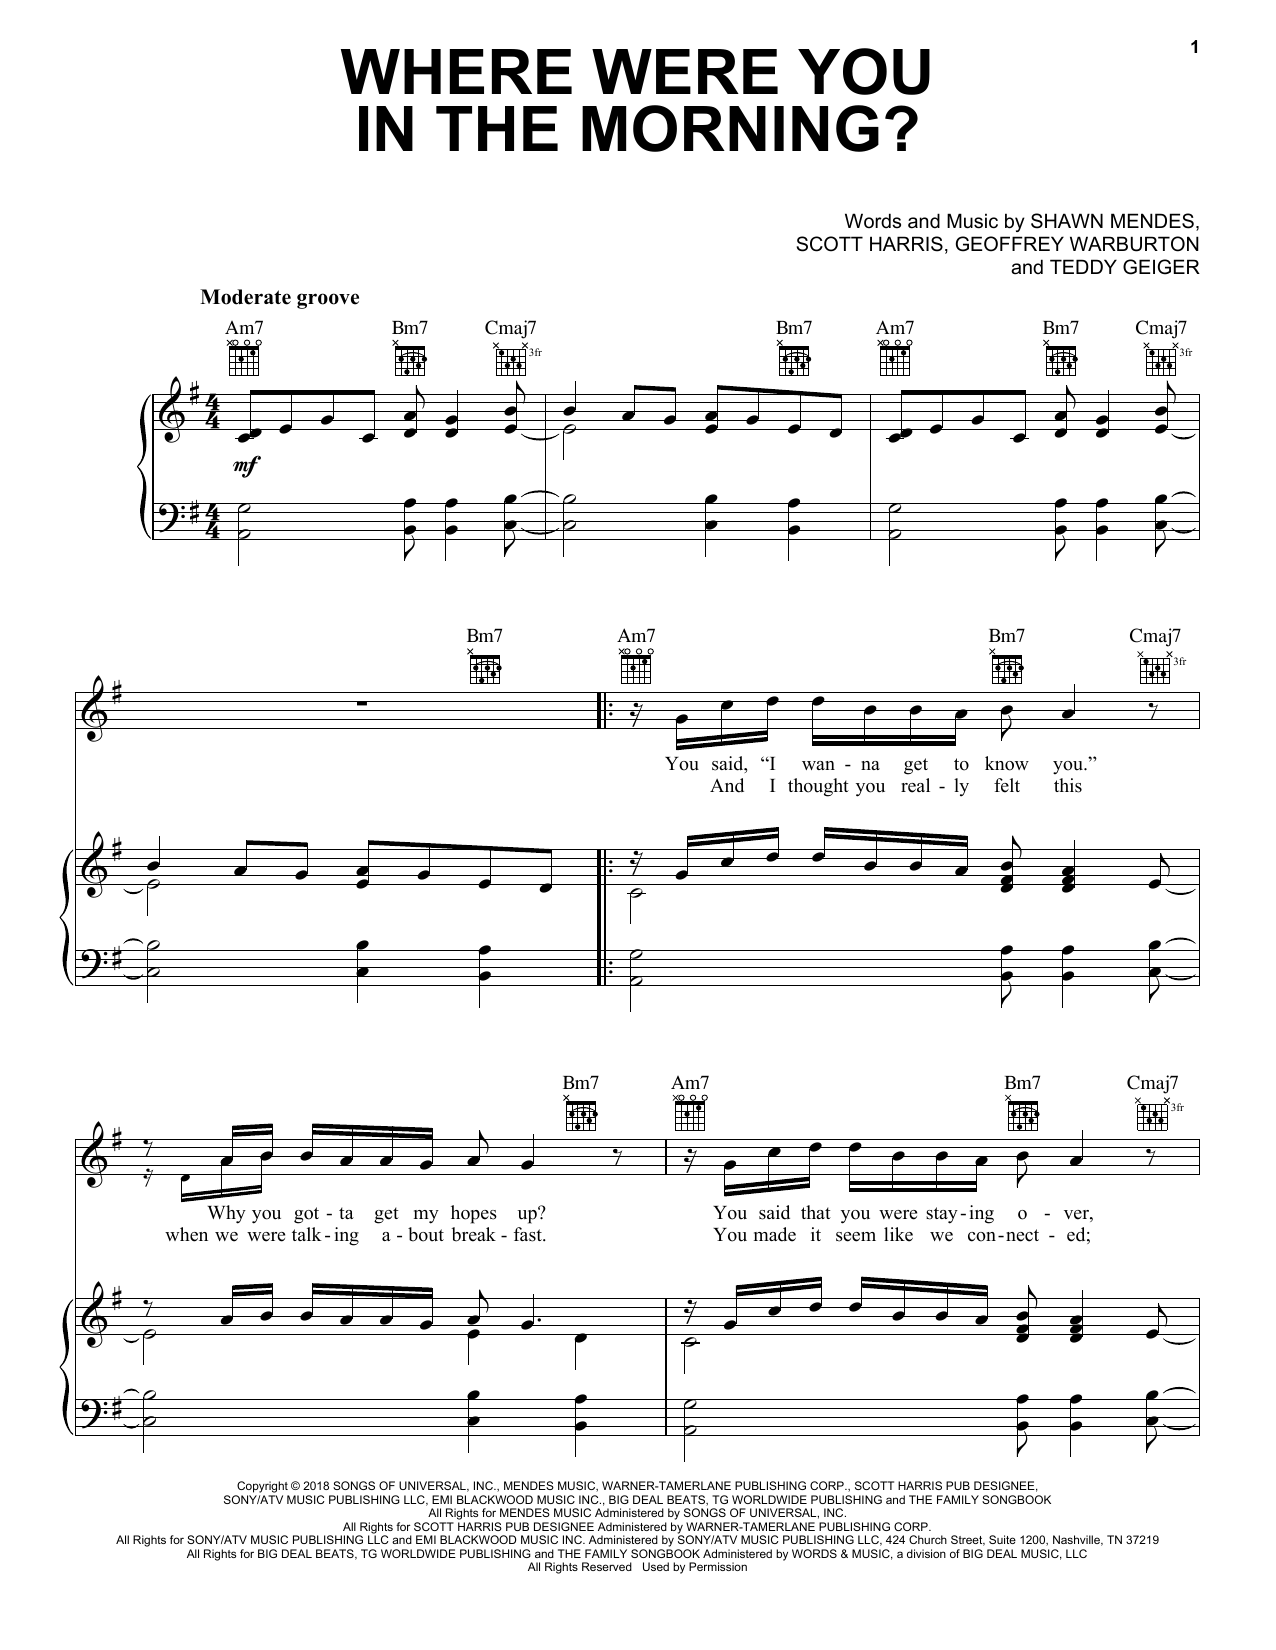 Download Shawn Mendes Where Were You In The Morning? Sheet Music